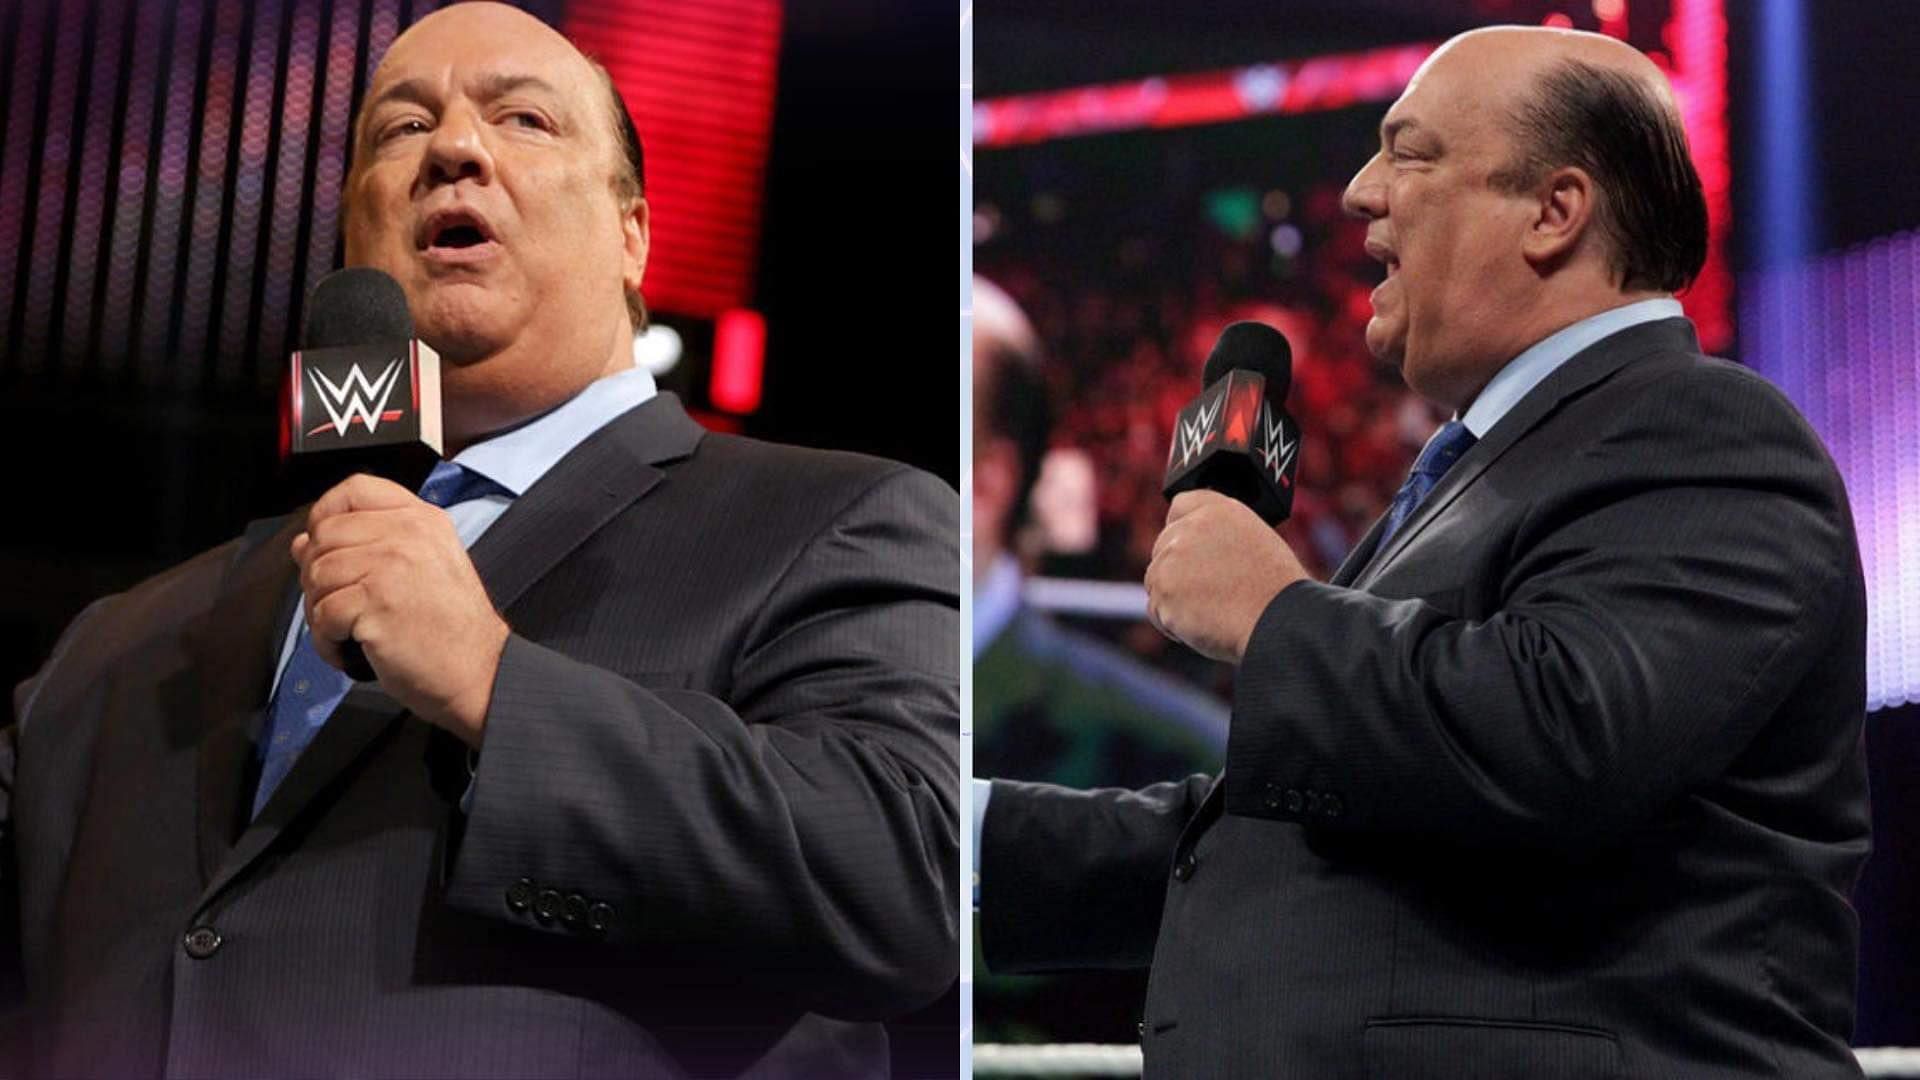 Paul Heyman is one of the best talkers in the industry.